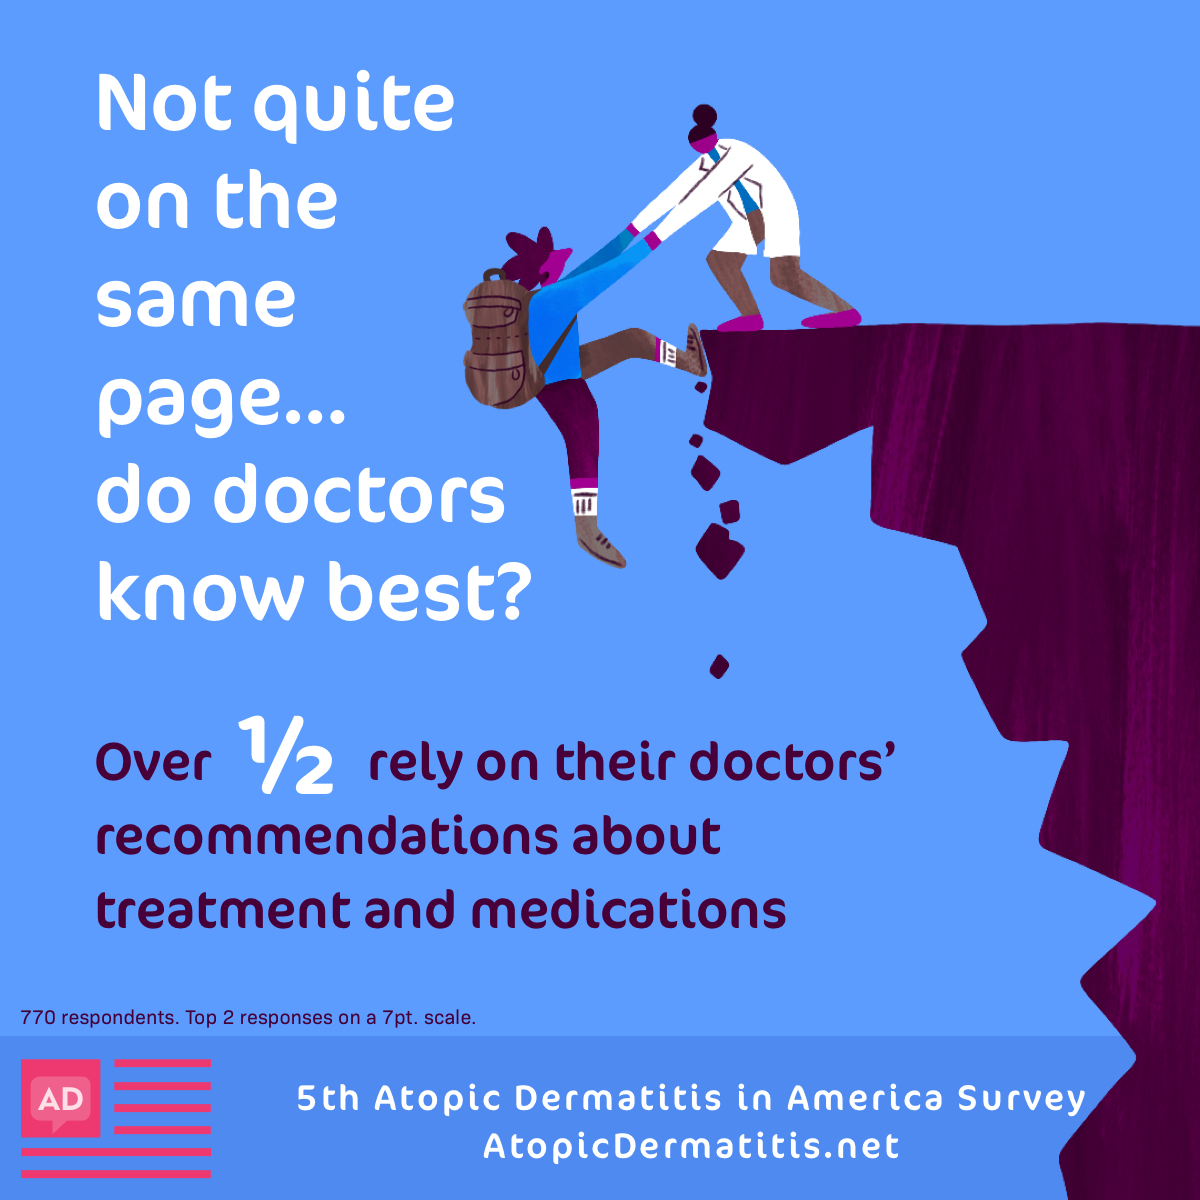 Over half of respondents rely on their doctors’ treatment and medication recommendations.